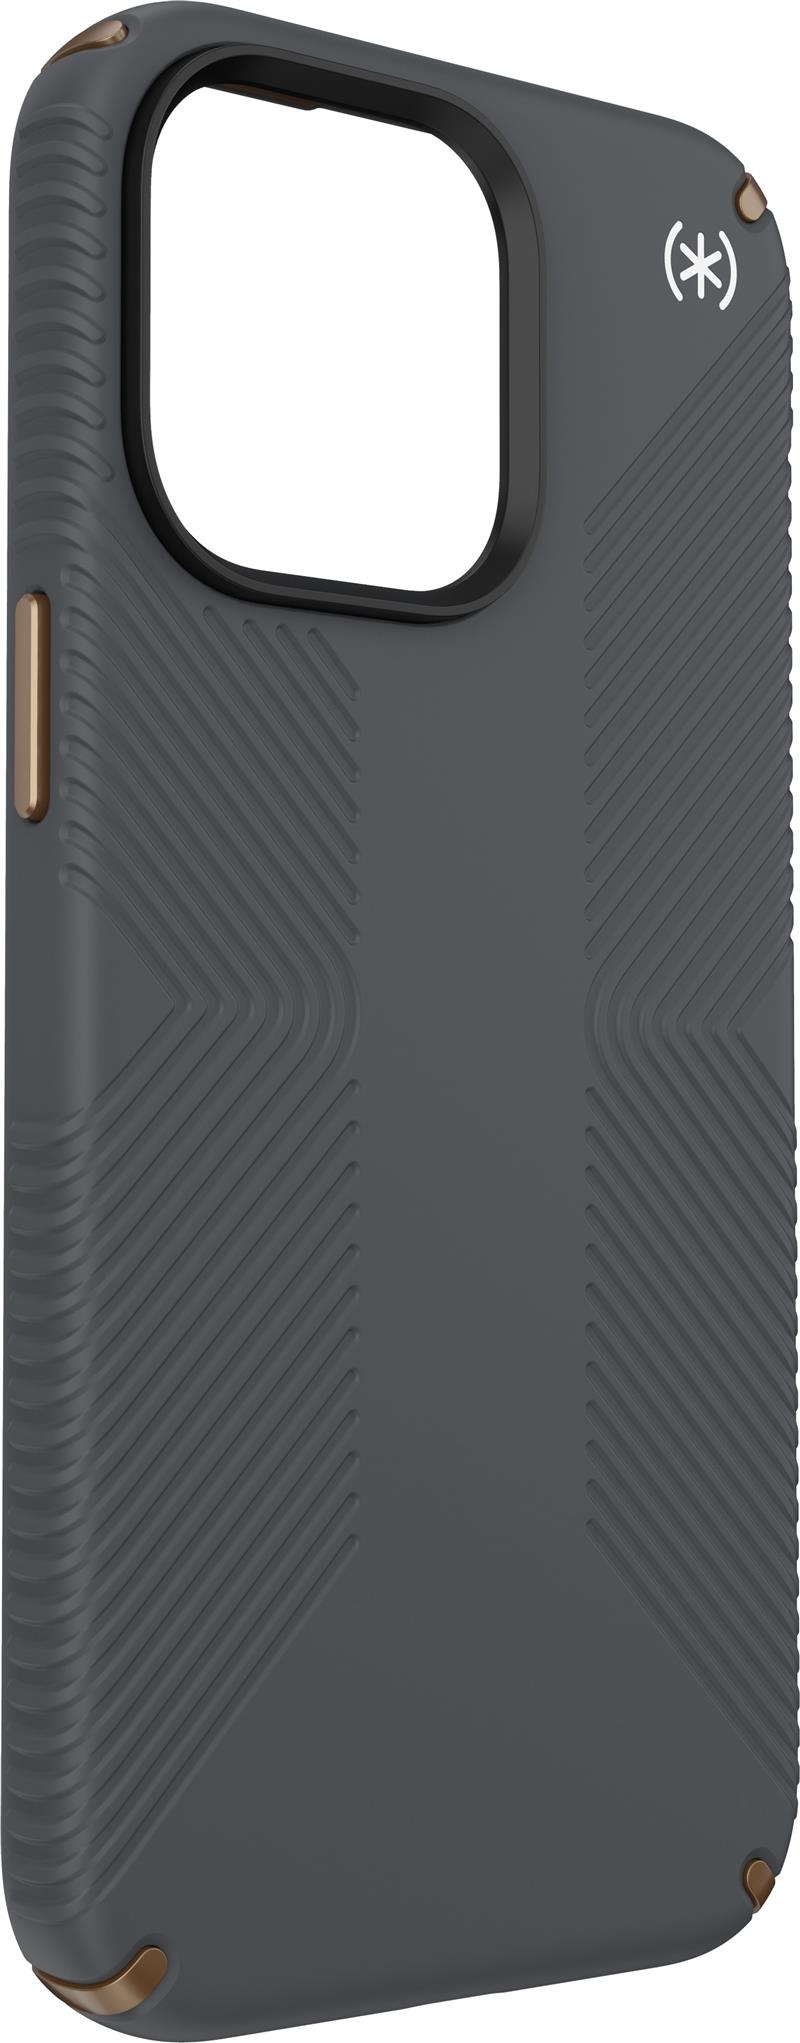 Speck Presidio2 Grip Apple iPhone 15 Pro Max Charcoal Grey - with Microban